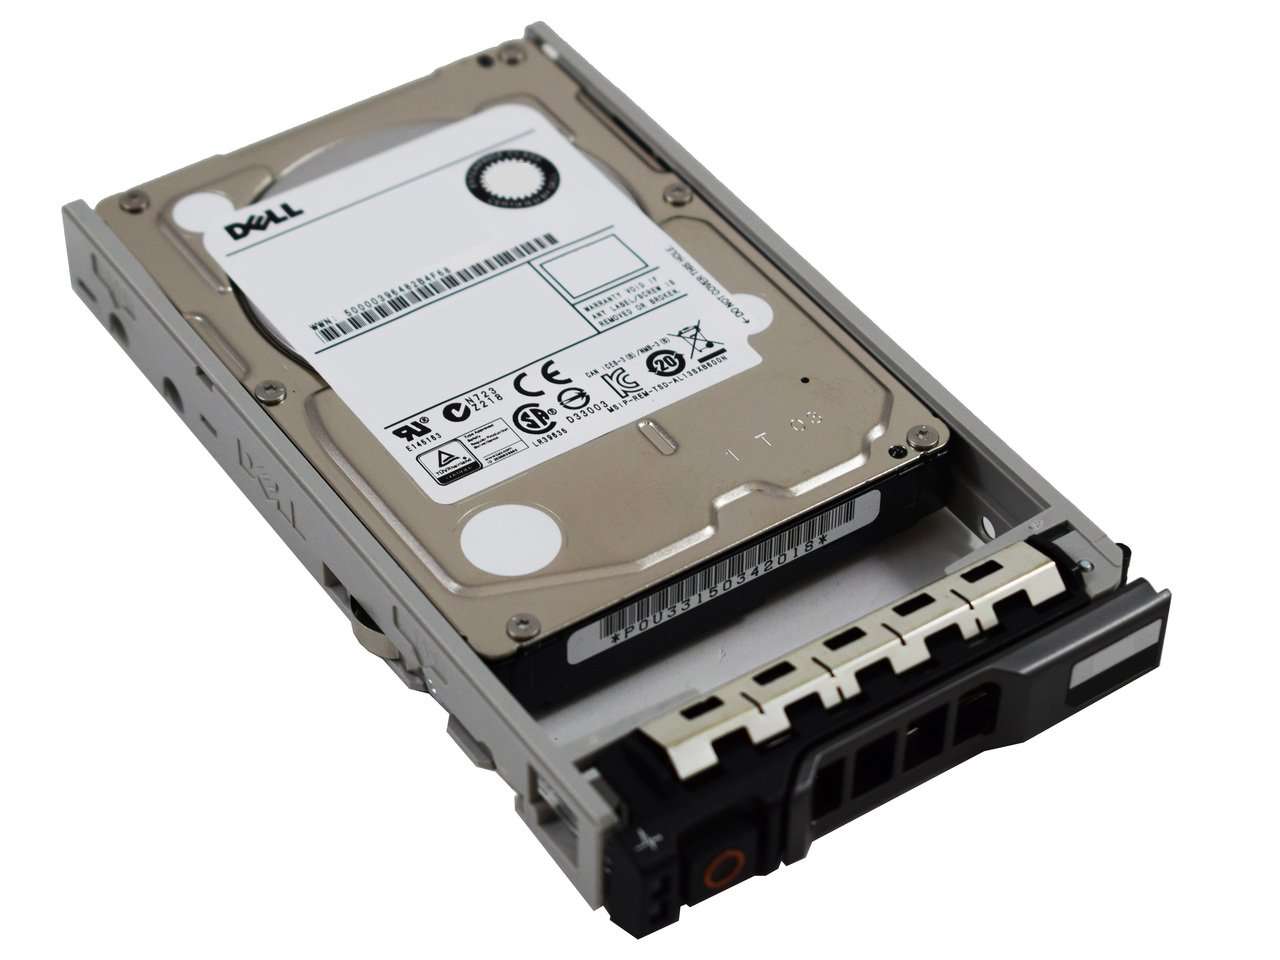 Dell G13 DX0P9 1.2TB 10K RPM SAS 12Gb/s 512n 2.5" SED Manufacturer Recertified HDD